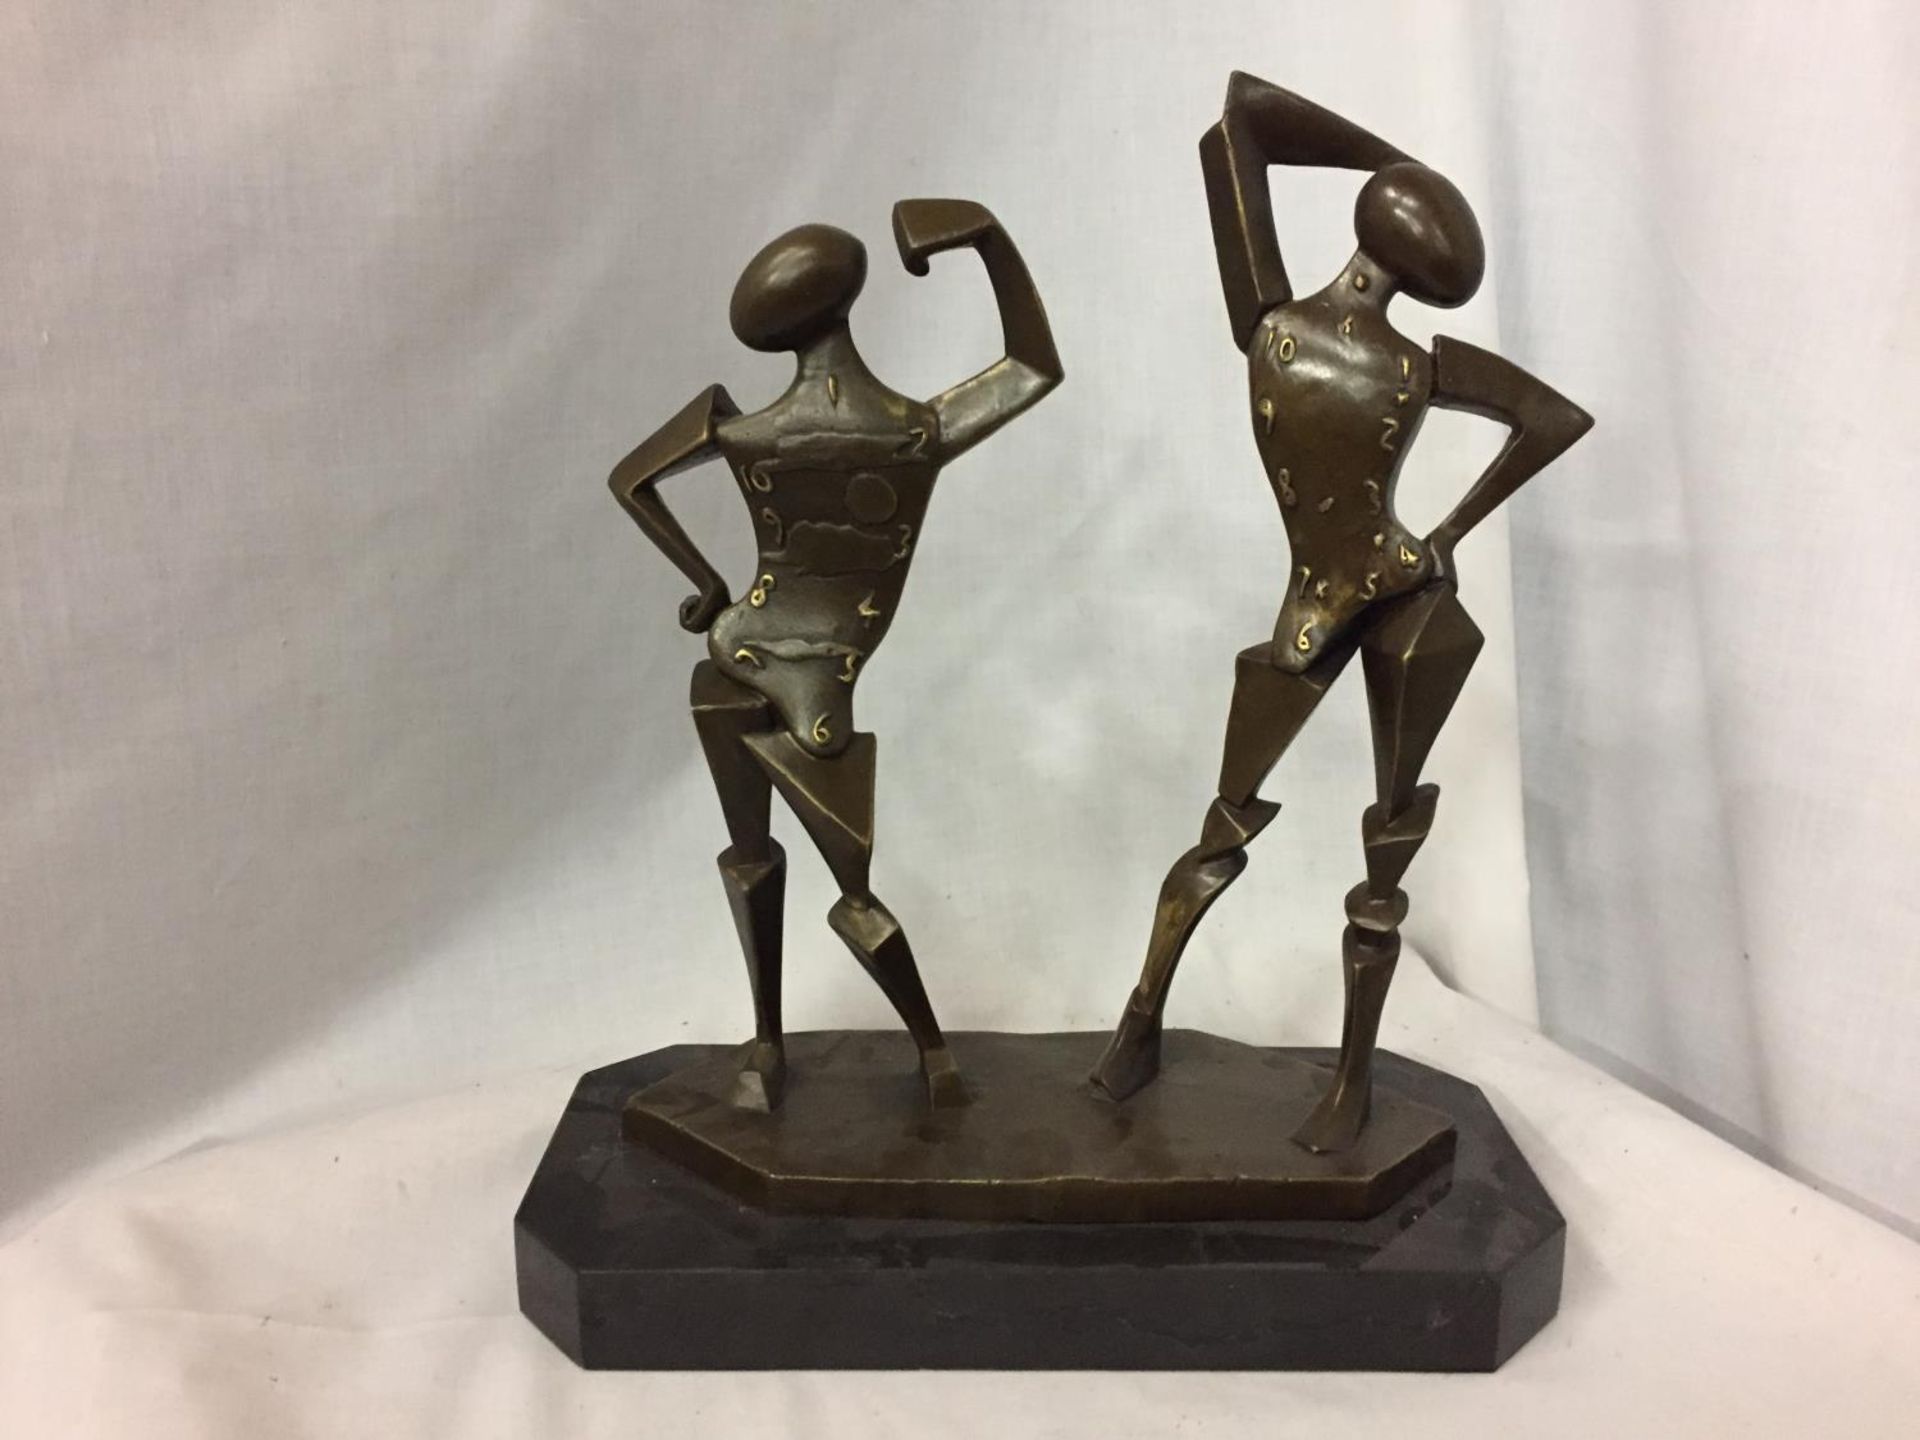 A BRONZE SCULPTURE OF TWO SALVADOR DALI FIGURES ON A MARBLE BASE H:35CM